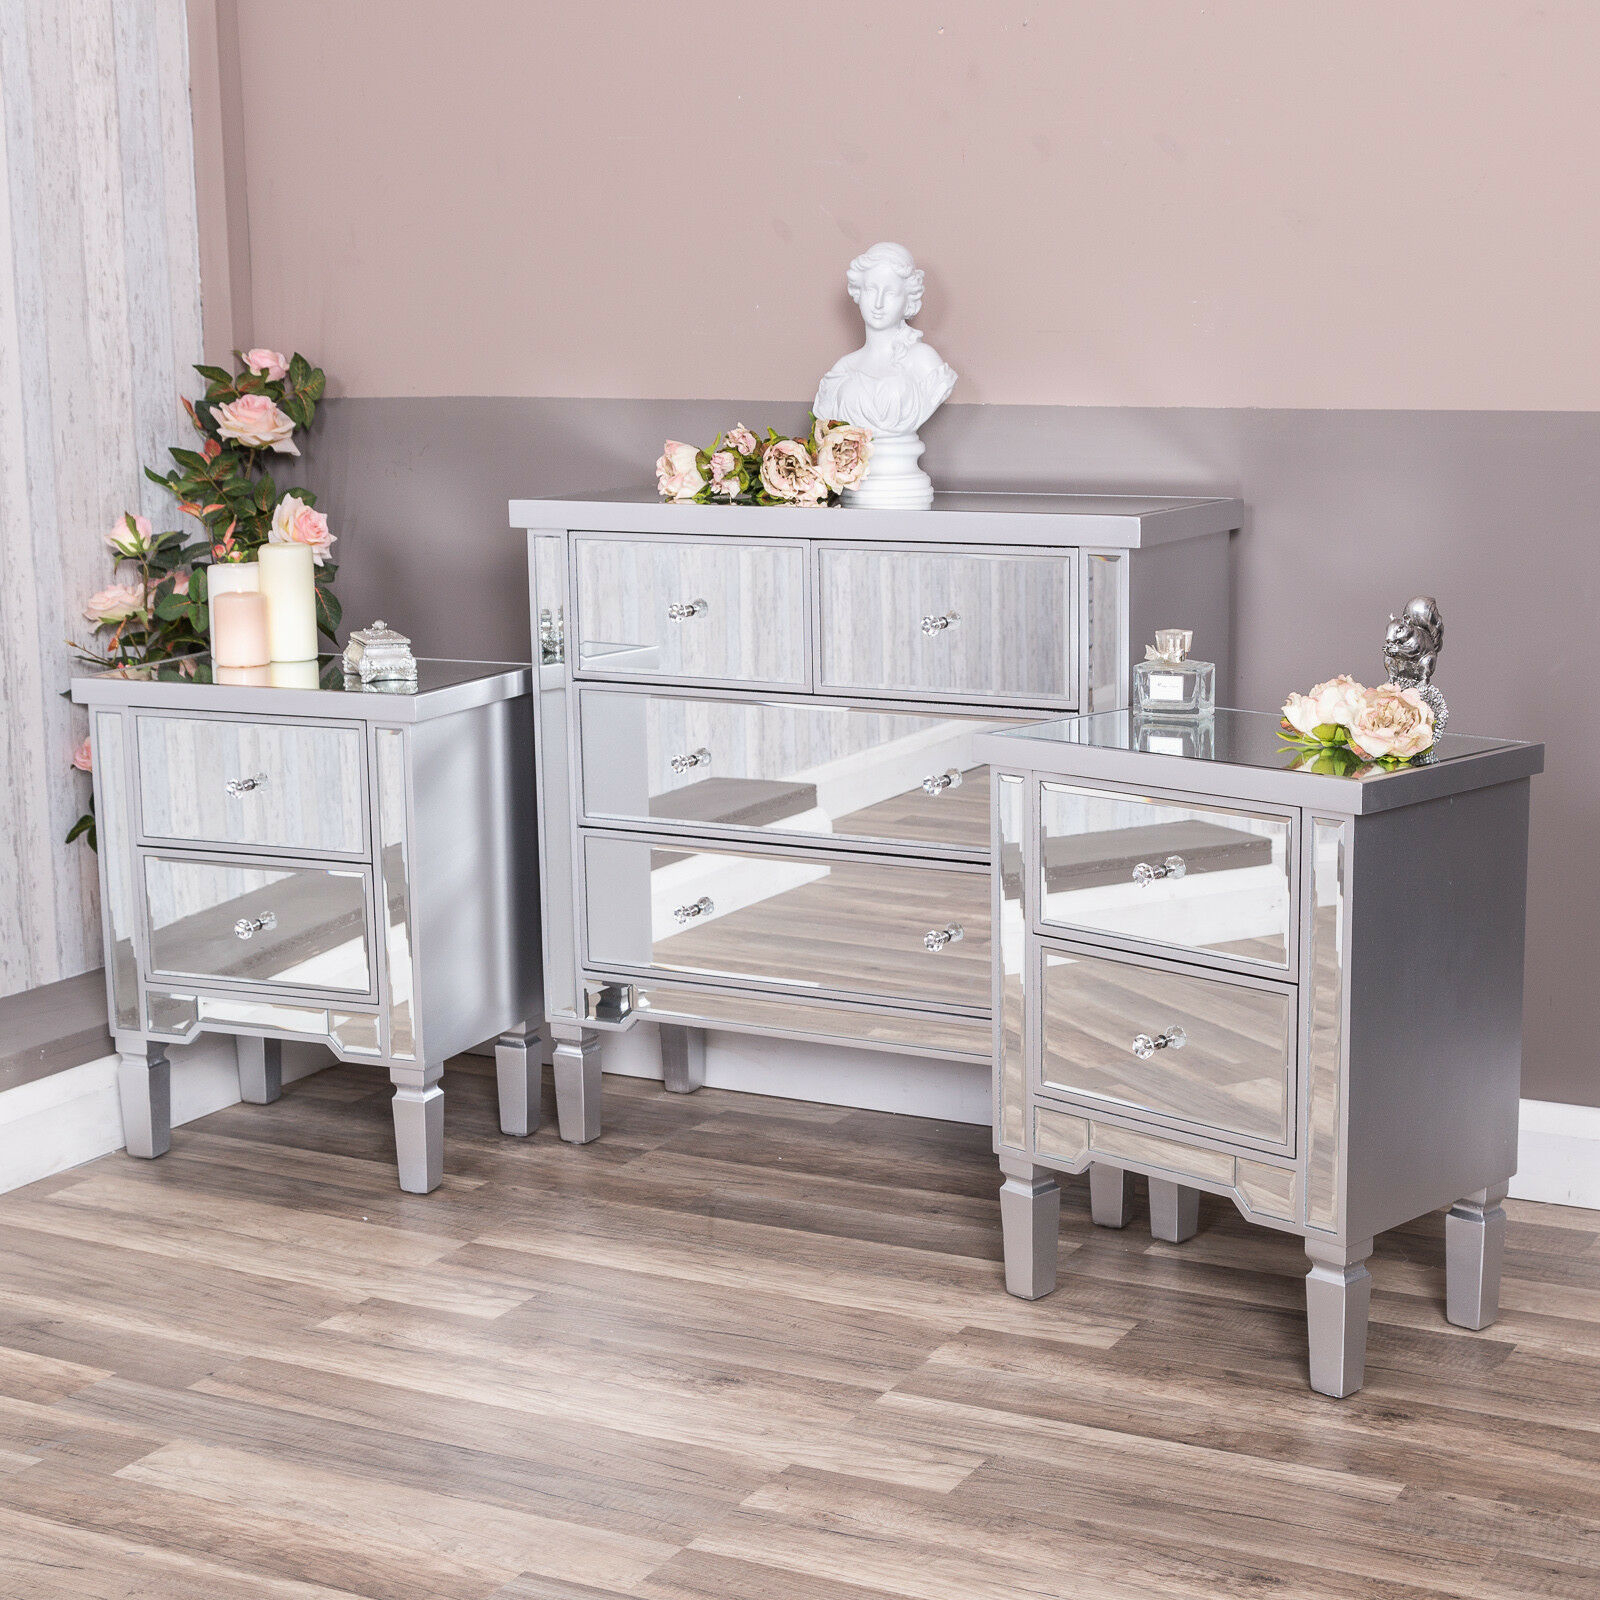 Details About Mirrored Furniture Silver Set Chest And Bedside Tables Hallway Bedroom Glass inside measurements 1600 X 1600